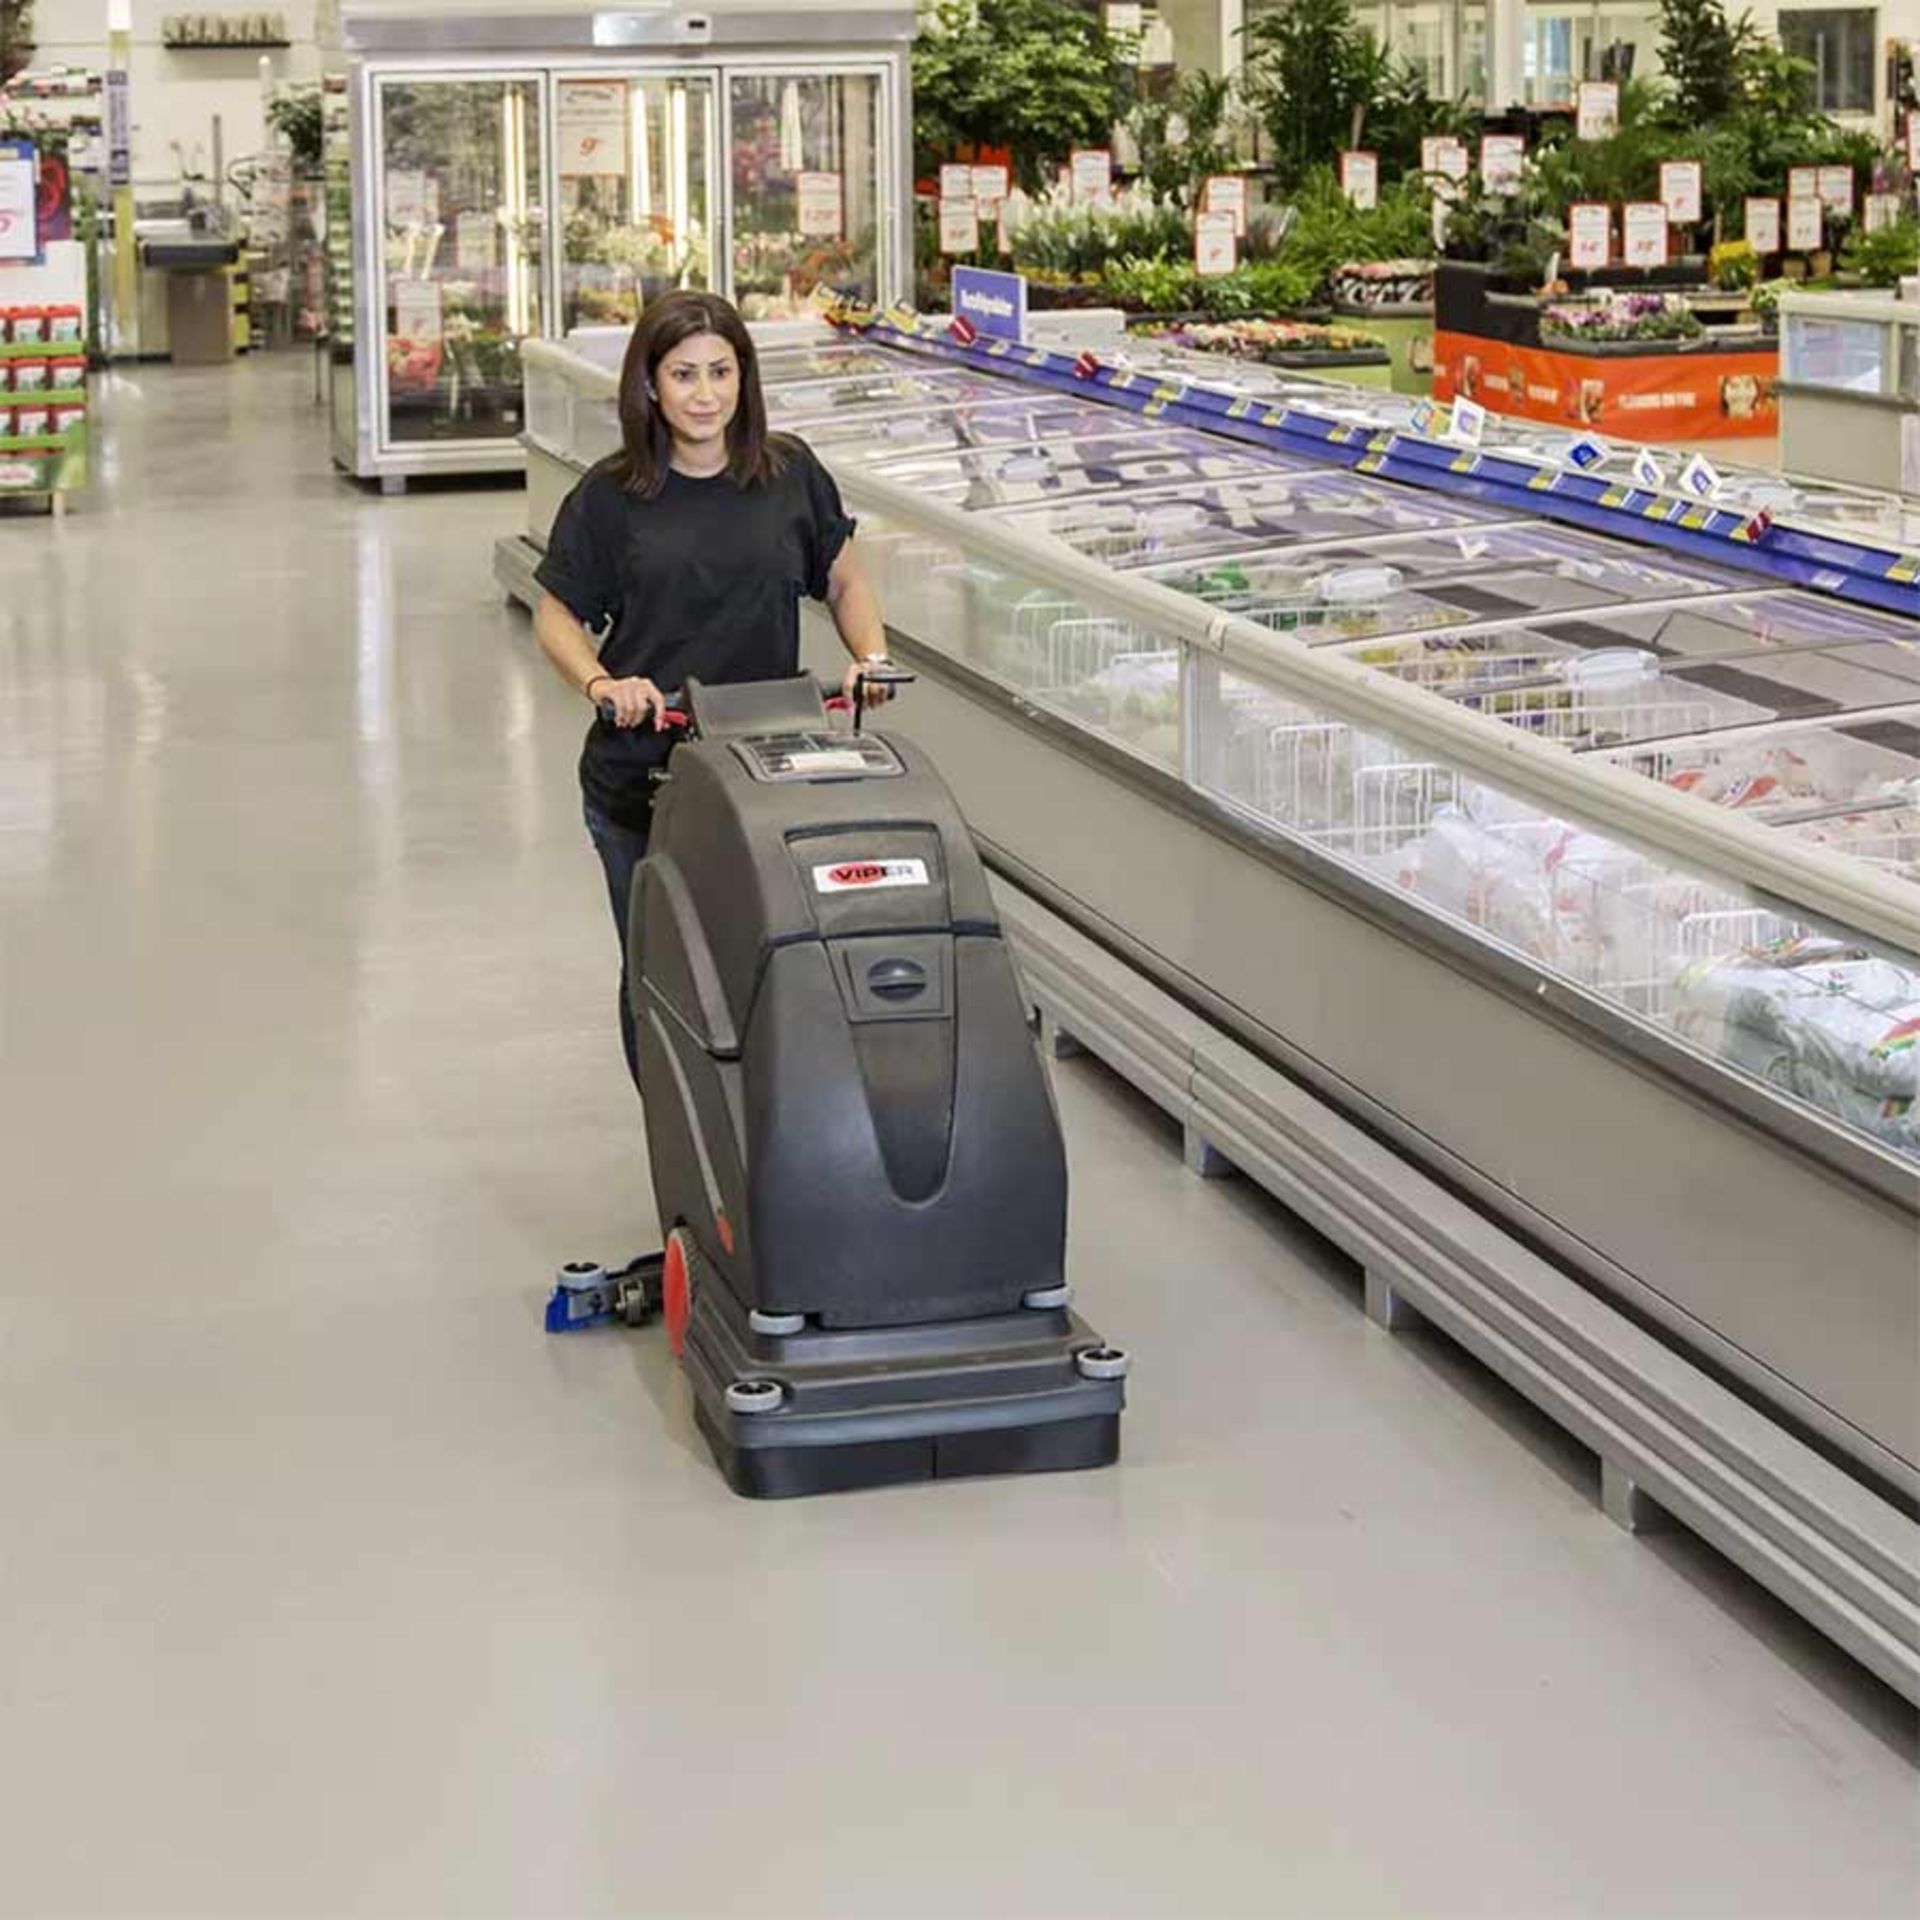 Viper Fang 20HD Walk-behind scrubber dryer. Transaxle drive system.  Light and easy to manoeuvre. - Image 2 of 4